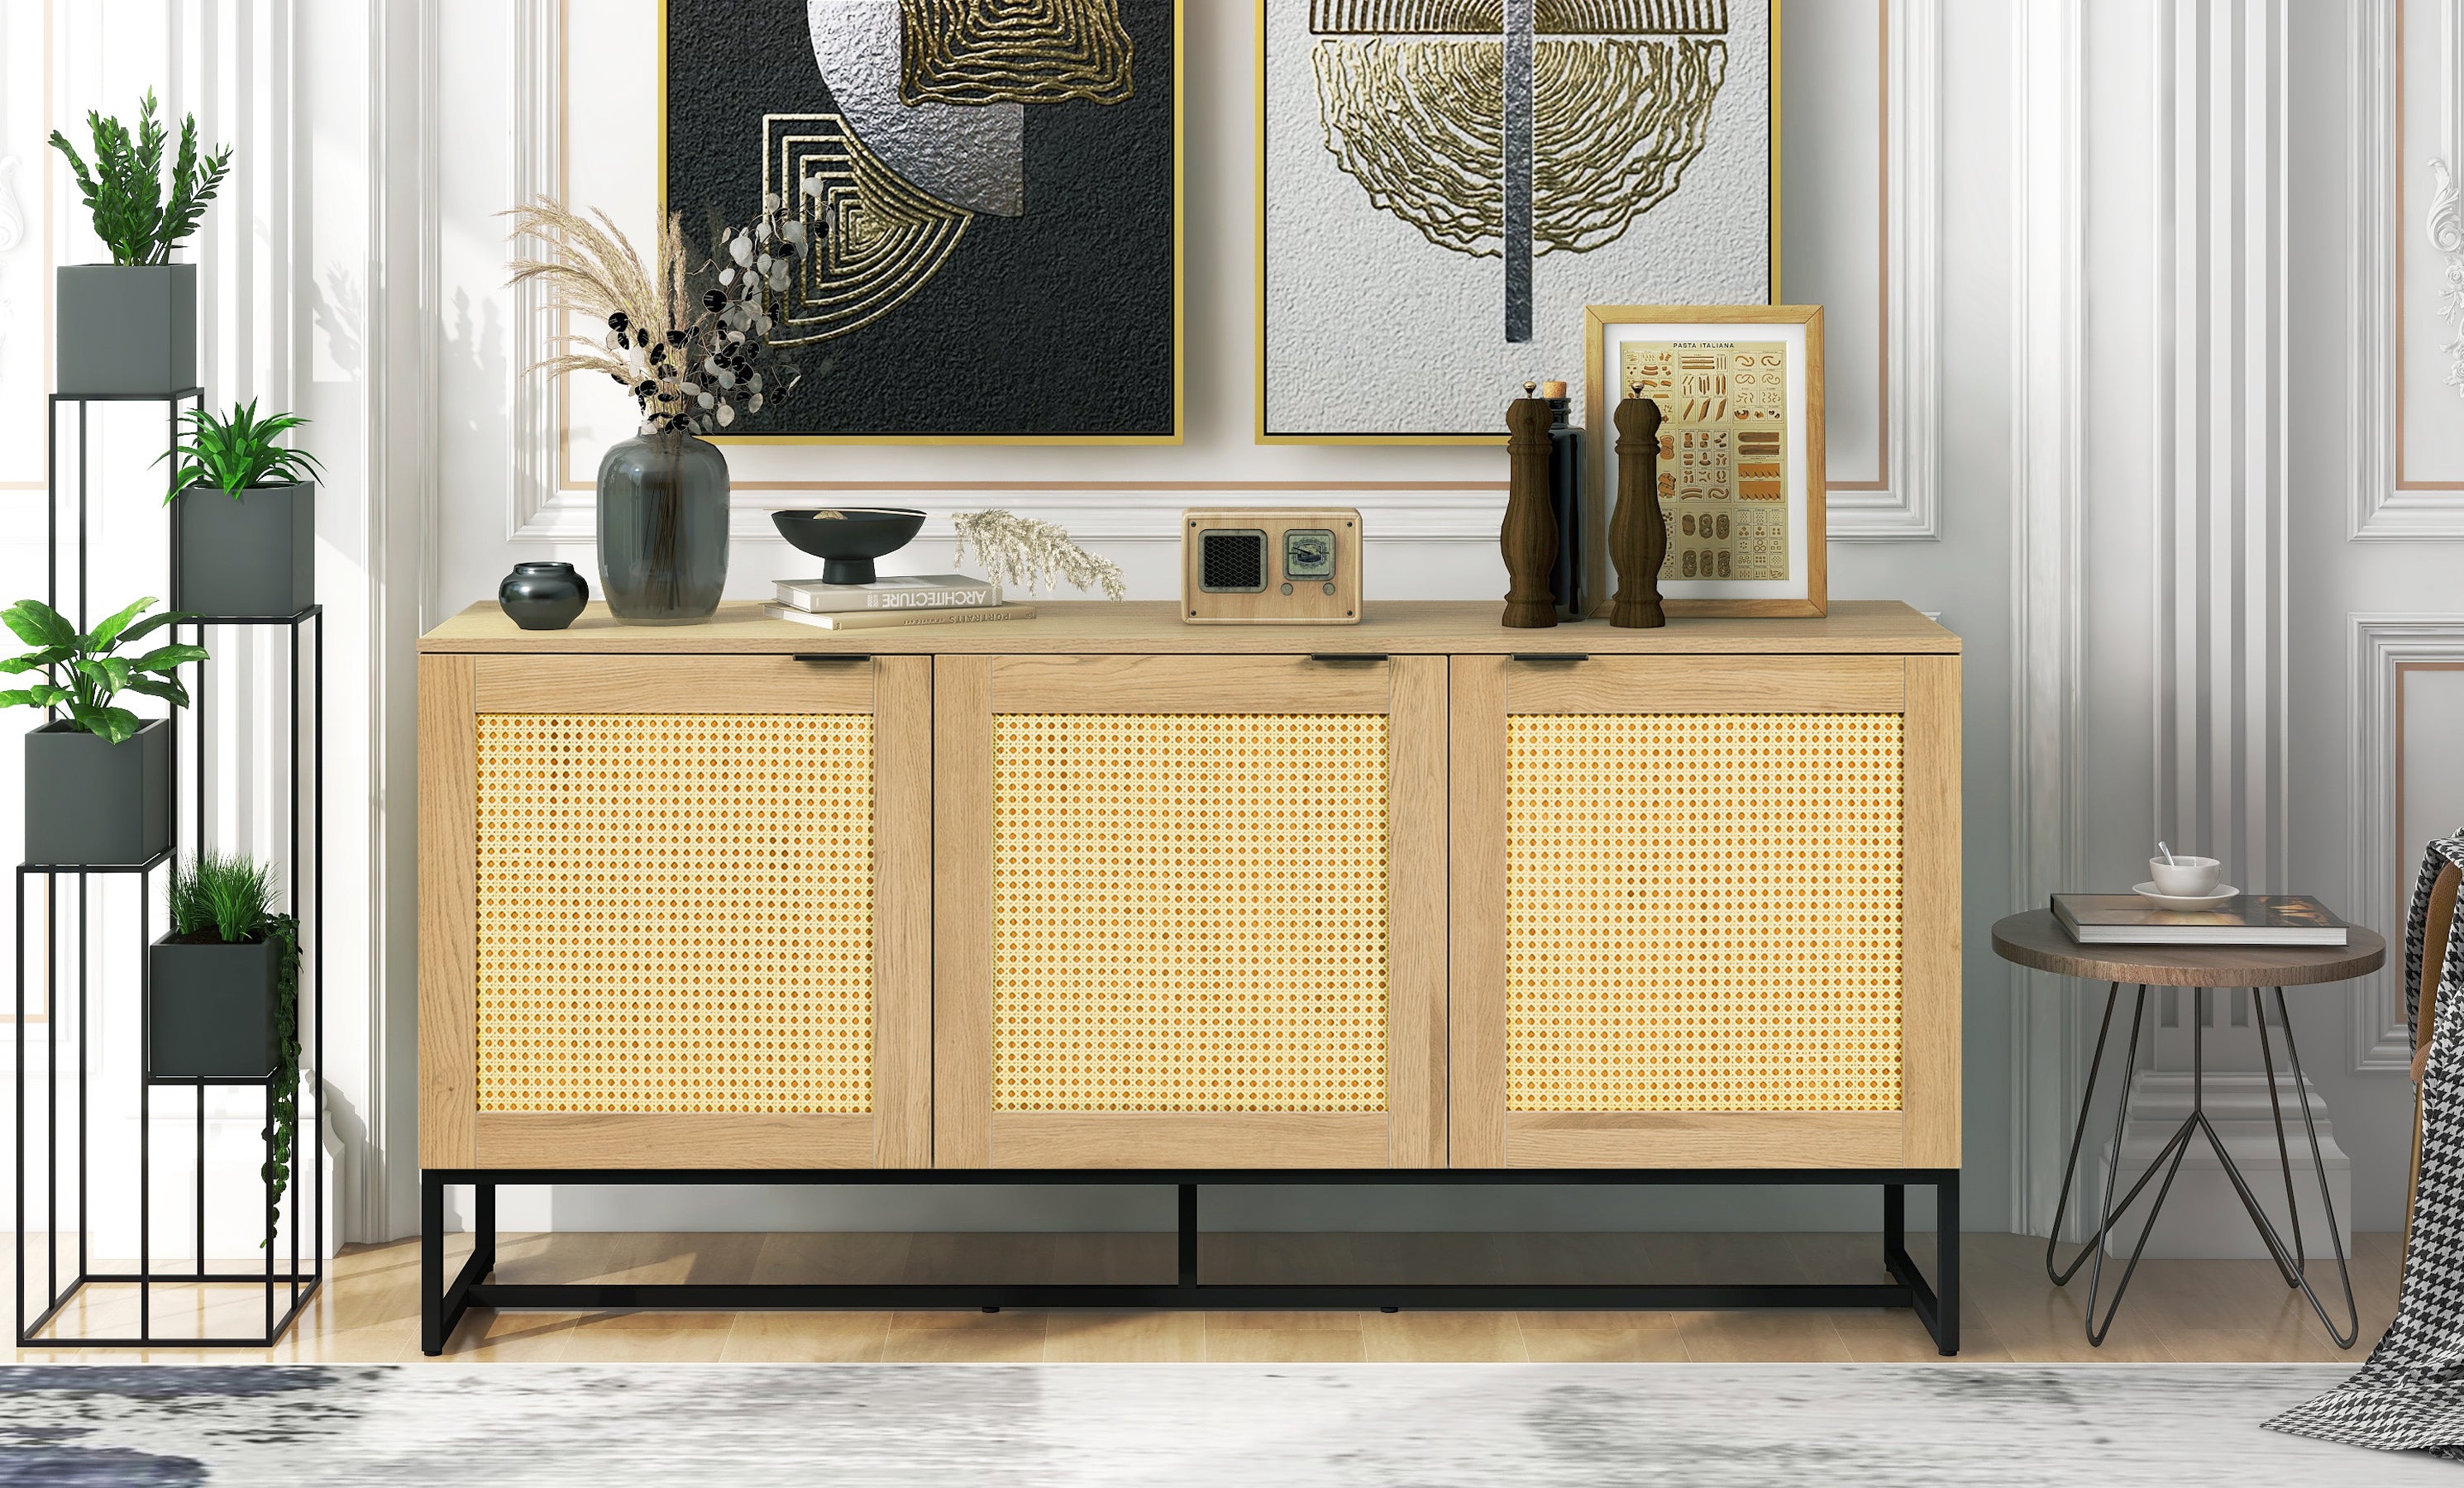 Wicker Sideboard Storage Cabinet 63 inch, with 3 doors - Natural color